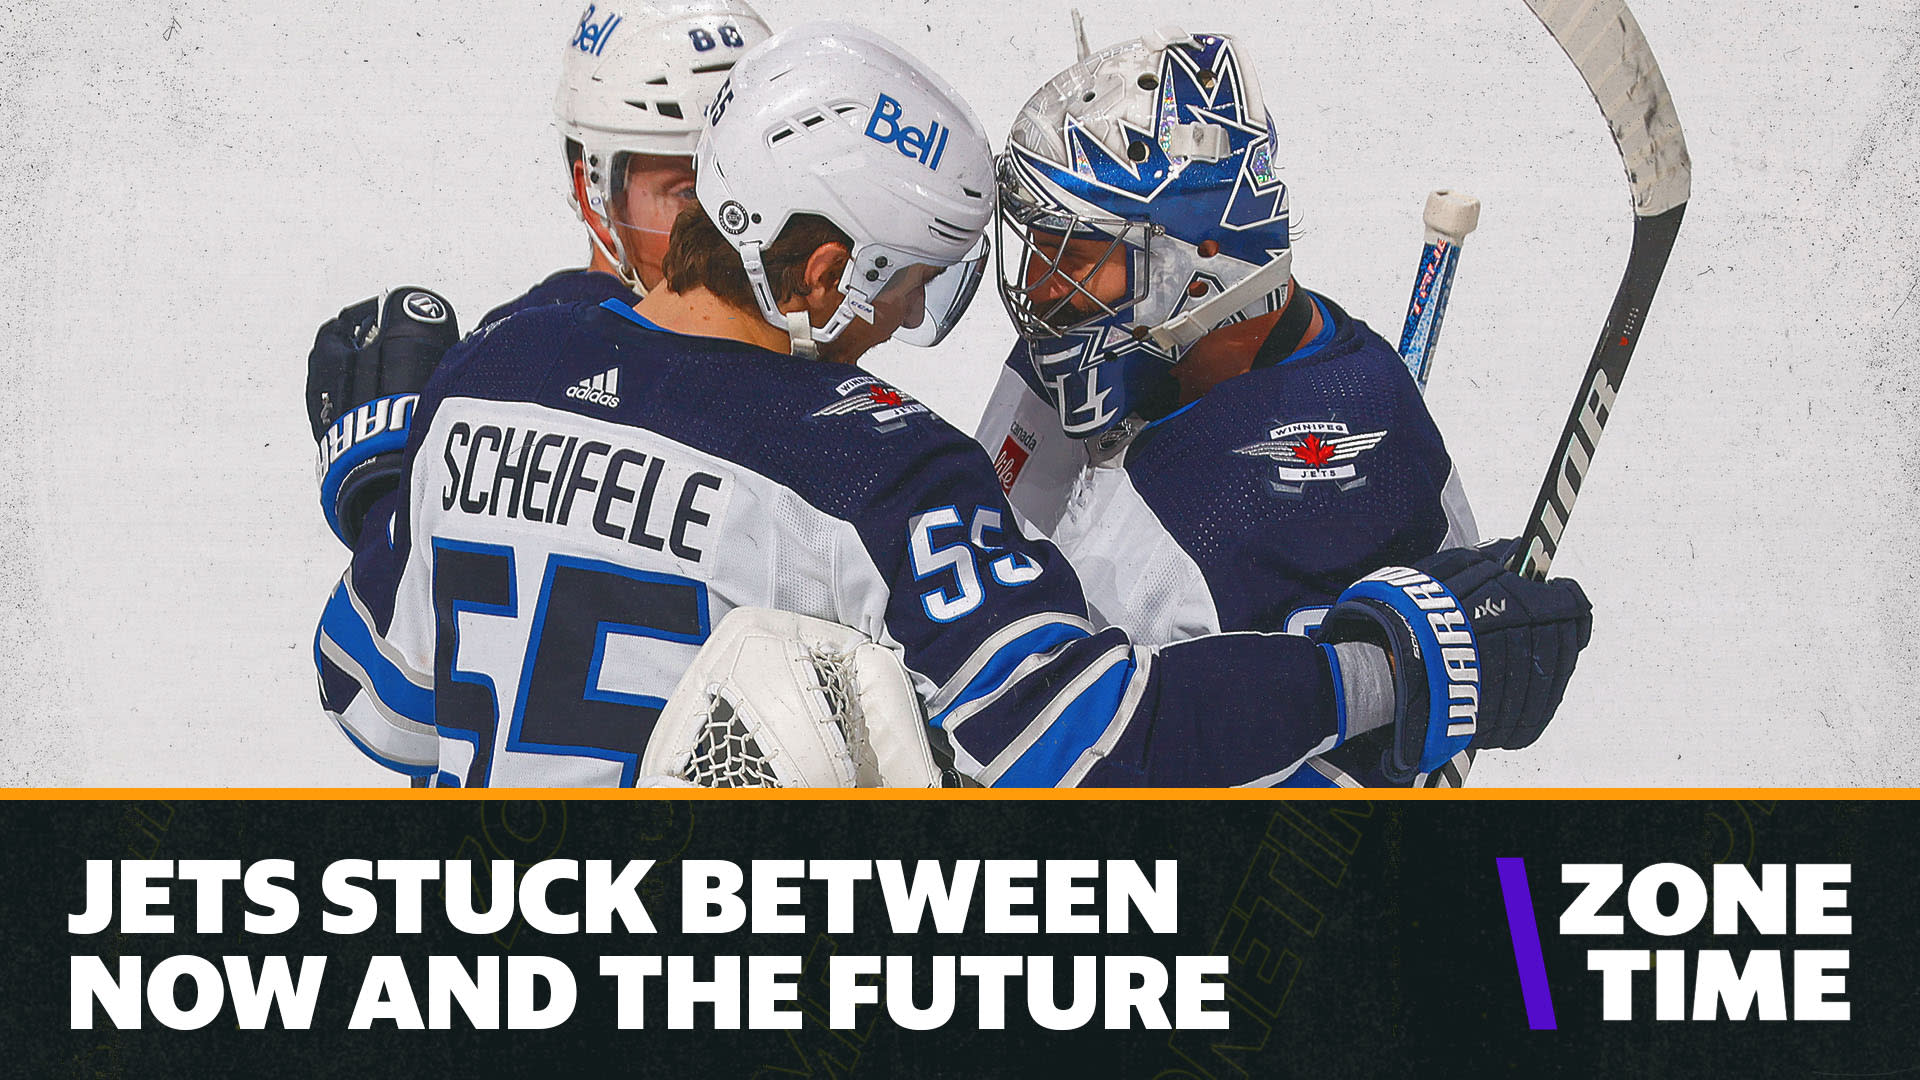 What stars Hellebuyck, Scheifele said about their future with the